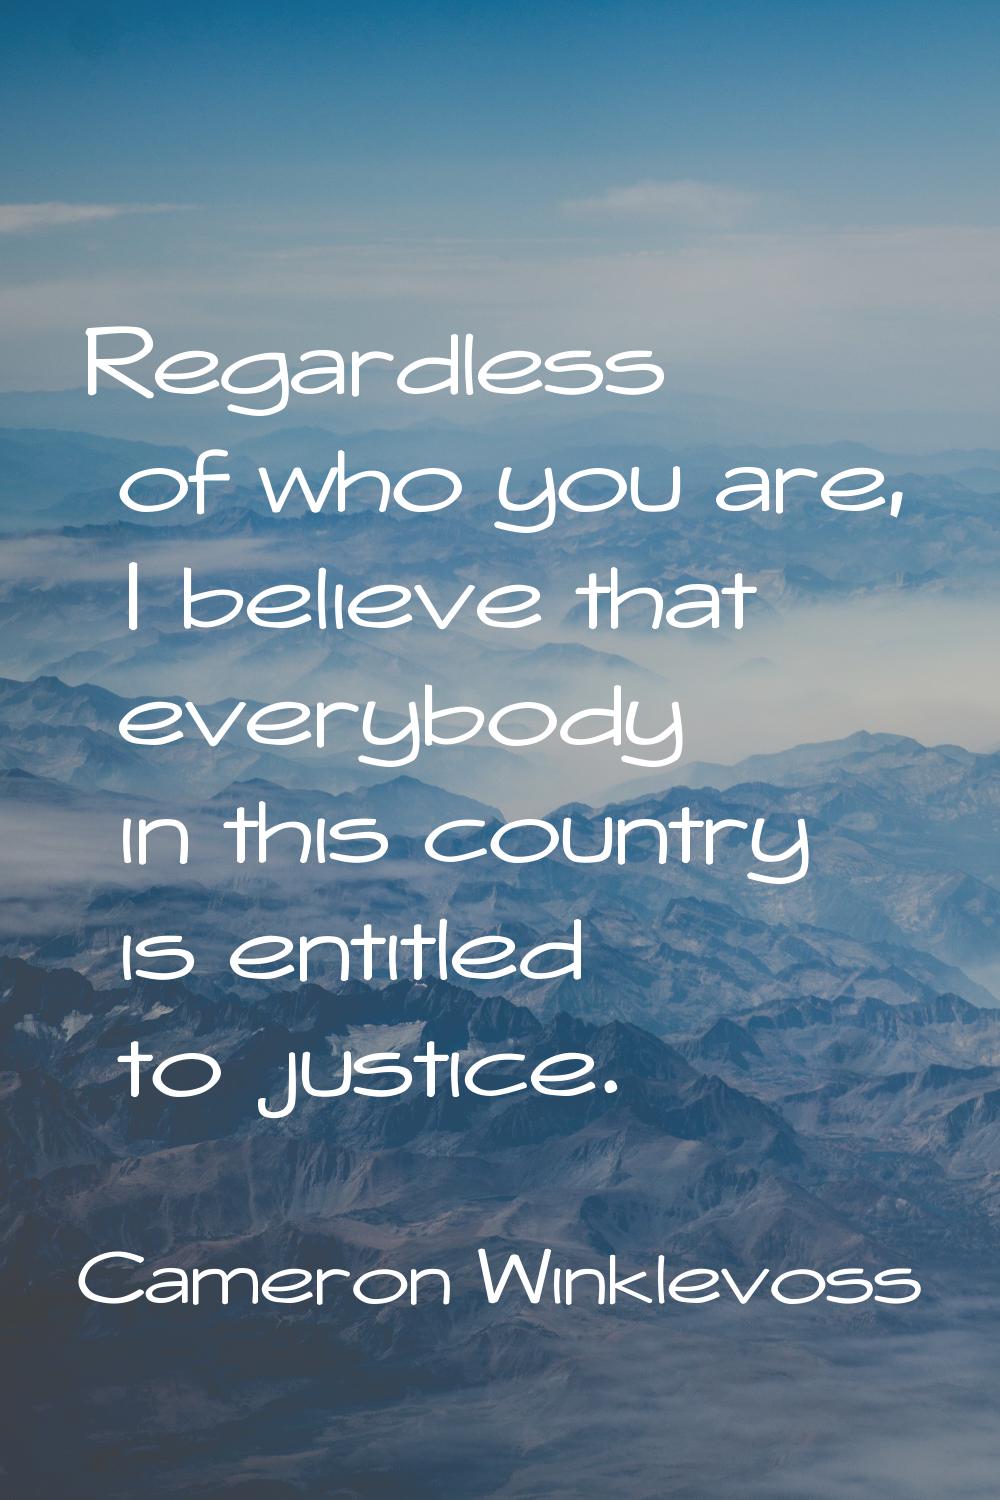 Regardless of who you are, I believe that everybody in this country is entitled to justice.